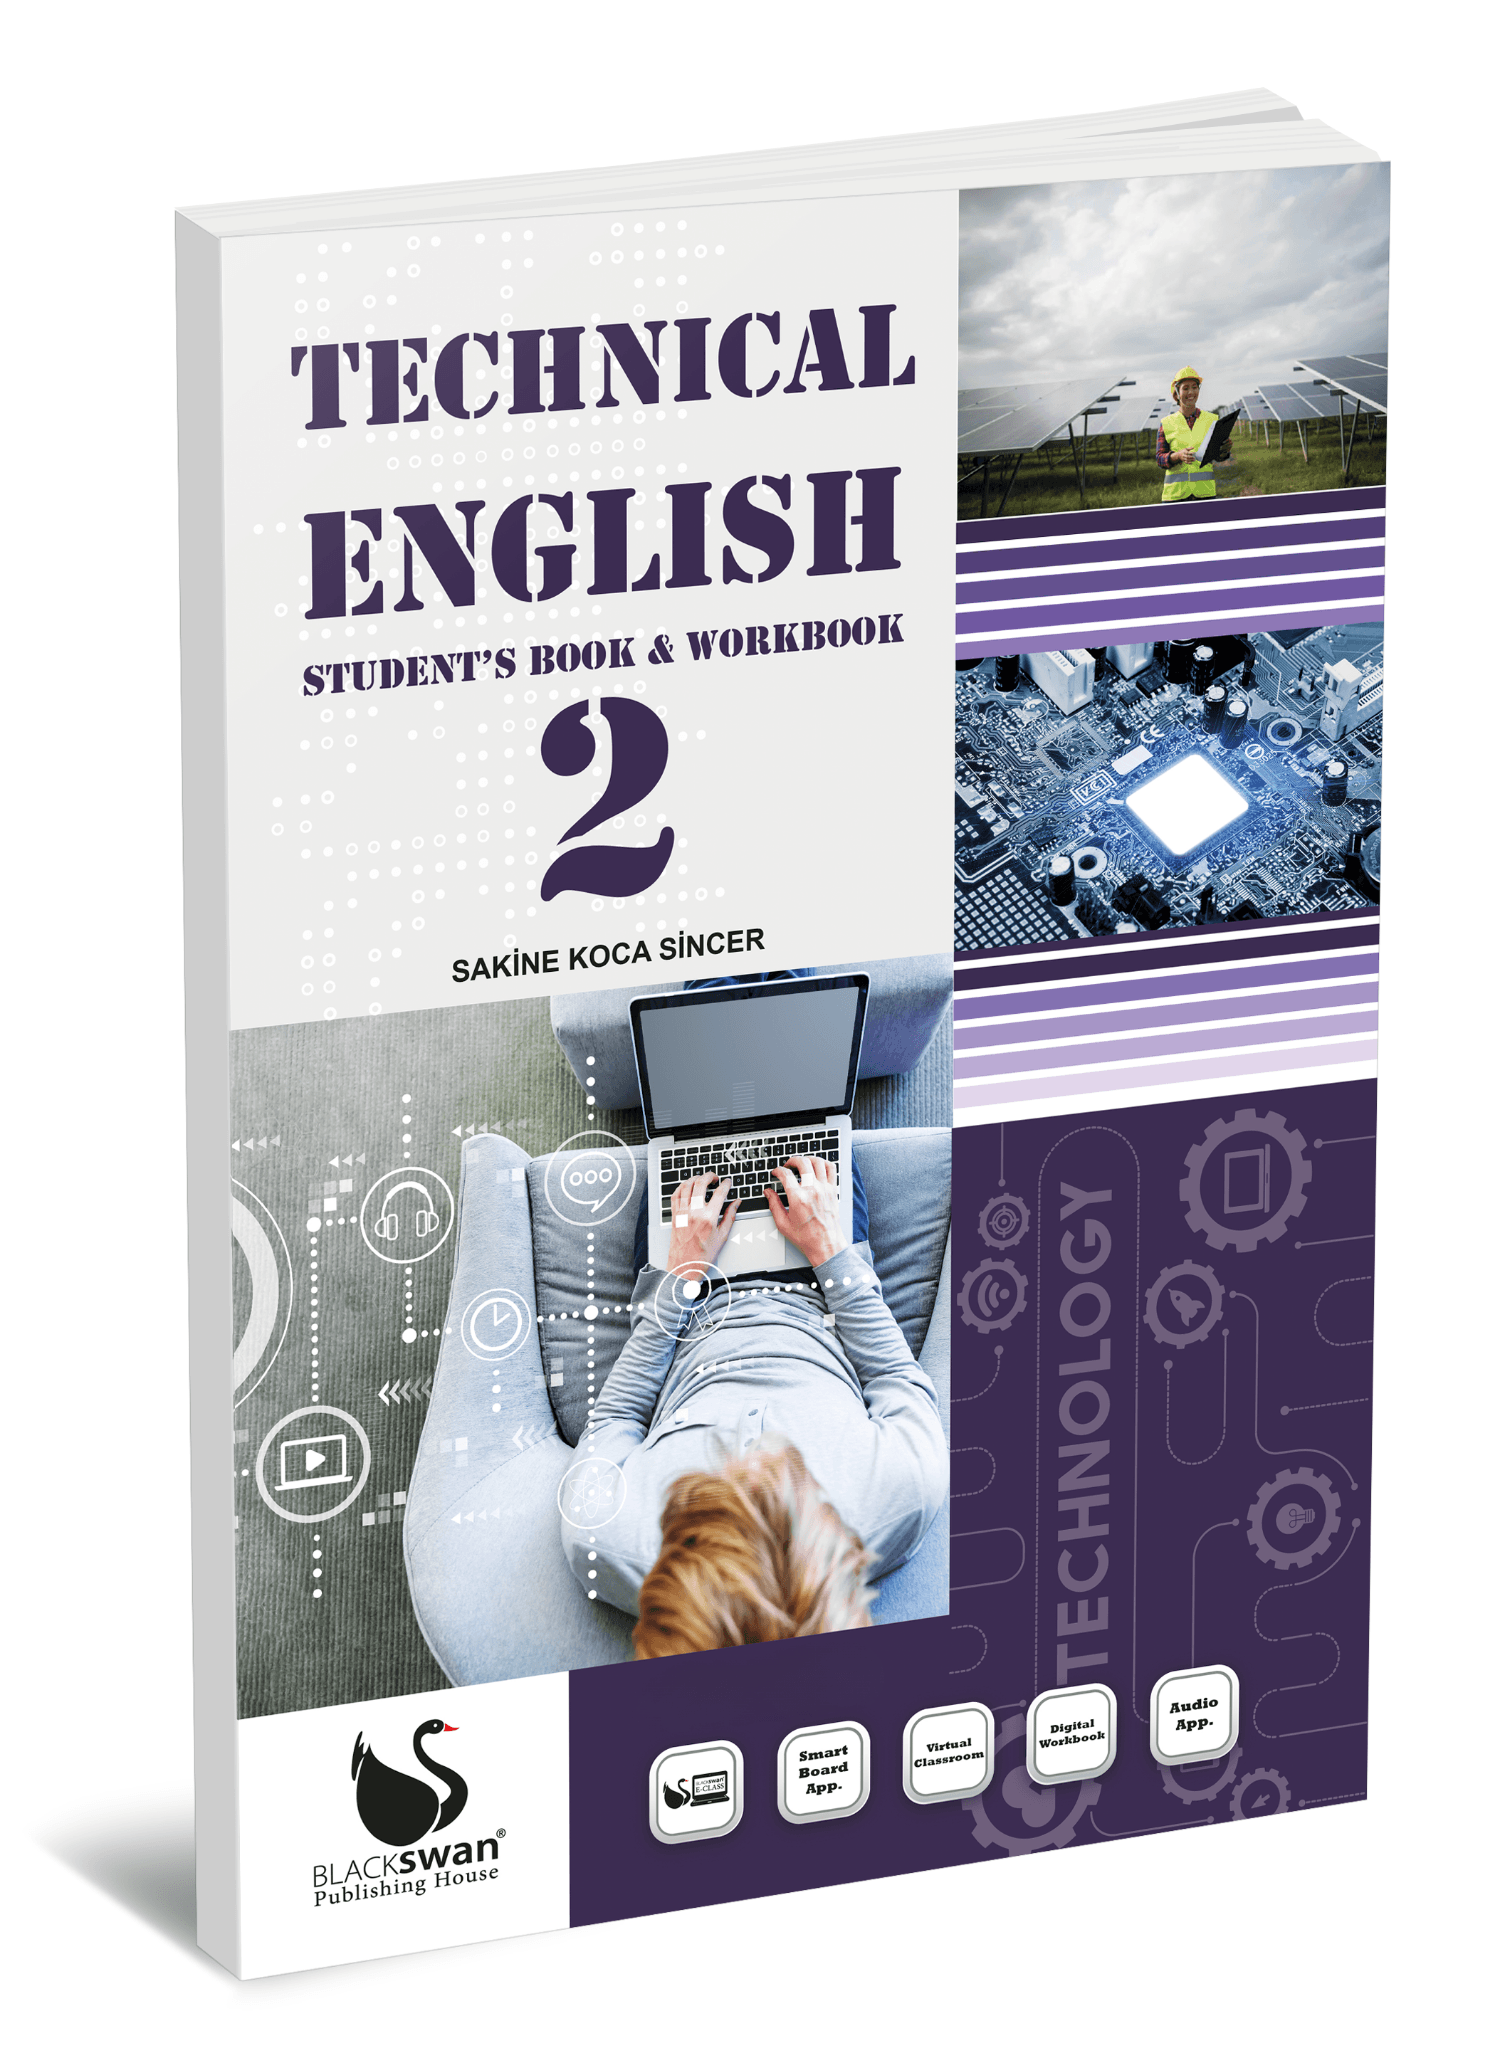 Technical English 2 Student's Book & Workbook